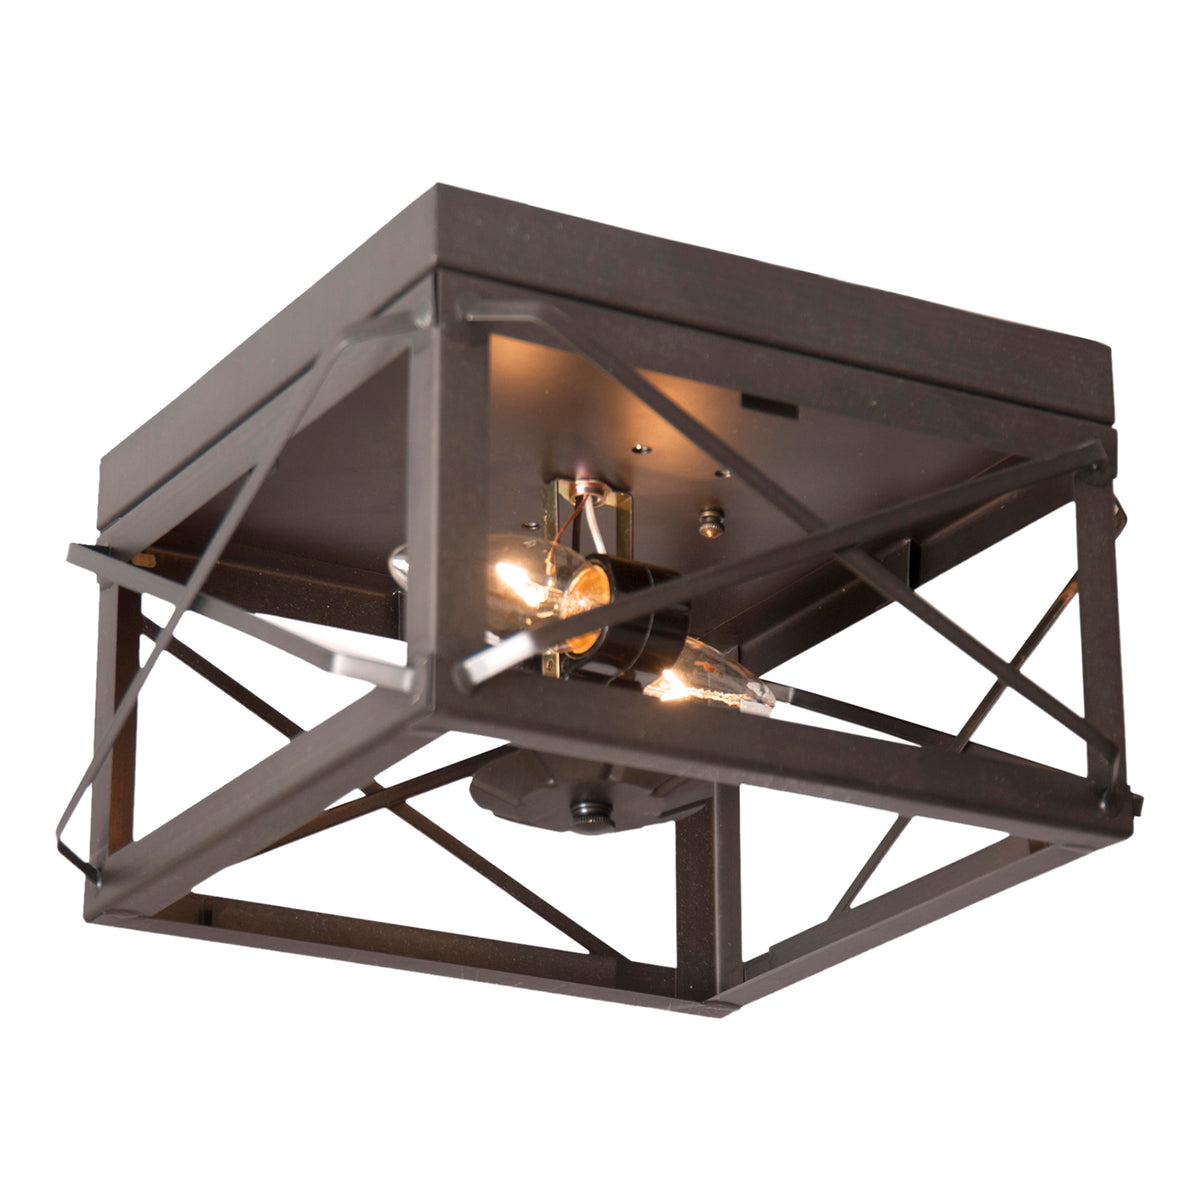 Double Ceiling Light with Folded Bars in Kettle Black